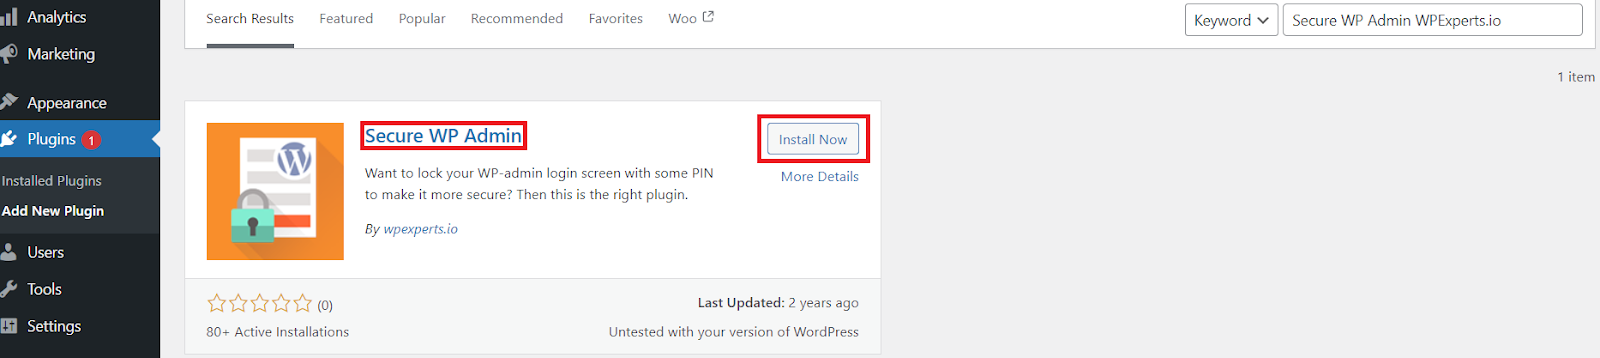 click-install-button-to-install-secure-wp-admin-plugin